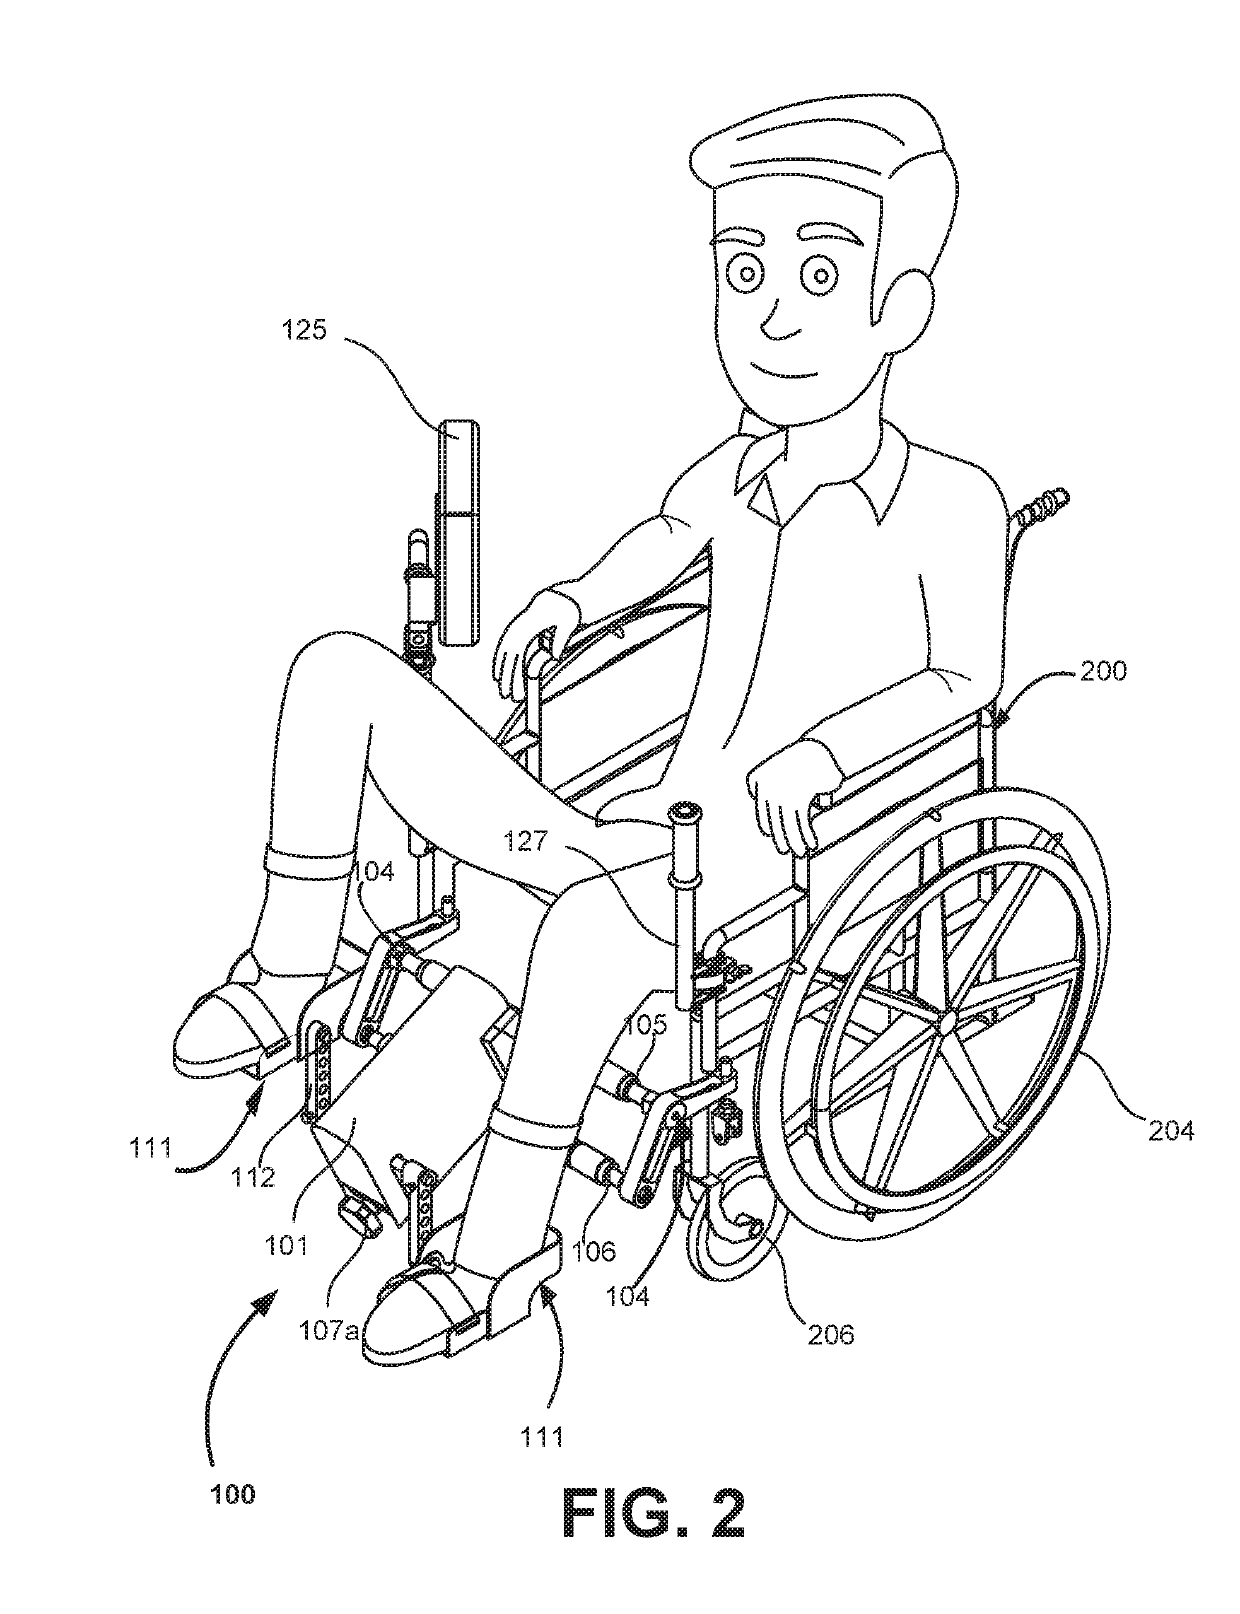 Simulator system and method for exercising lower limbs of a user seated on a wheelchair or like vehicular system